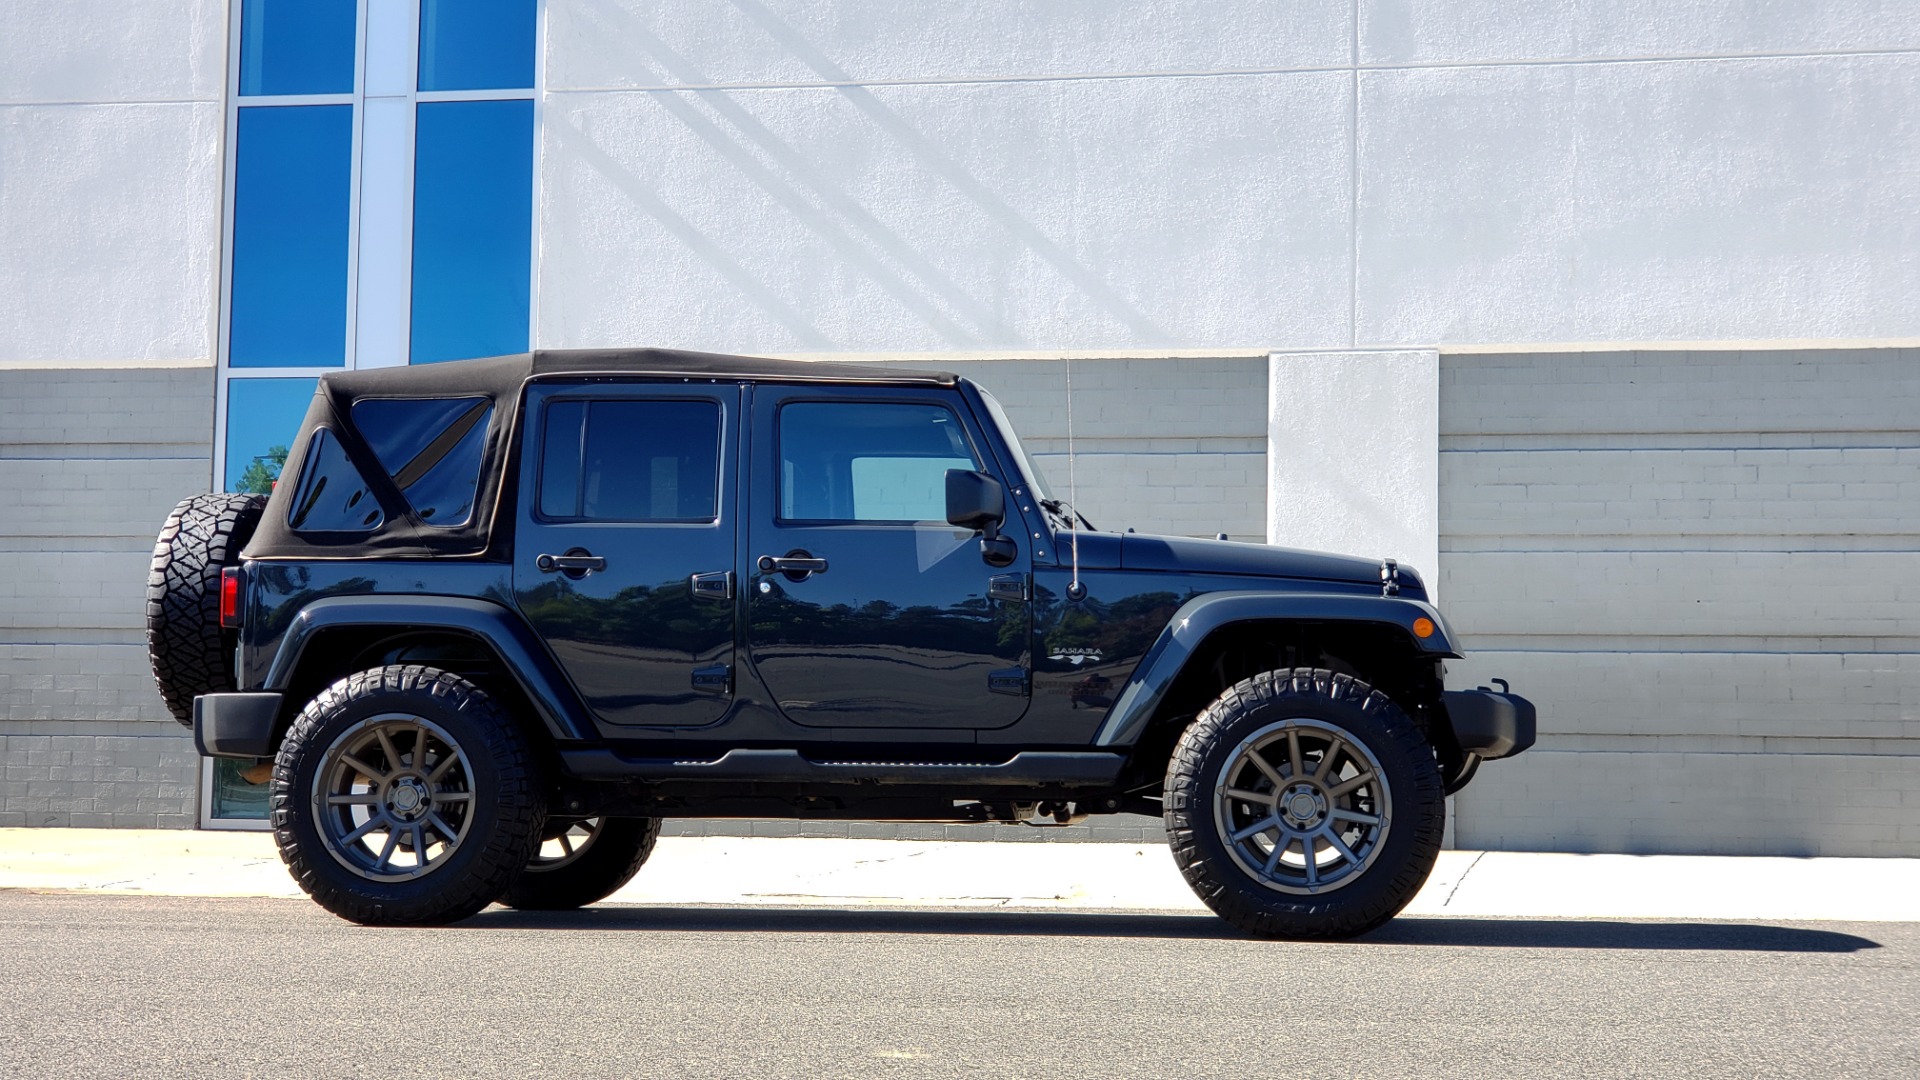 Used 2016 Jeep WRANGLER UNLIMITED SAHARA 4X4 / NAV / ALPINE / TOW PKG / CUSTOM WHEELS for sale Sold at Formula Imports in Charlotte NC 28227 8